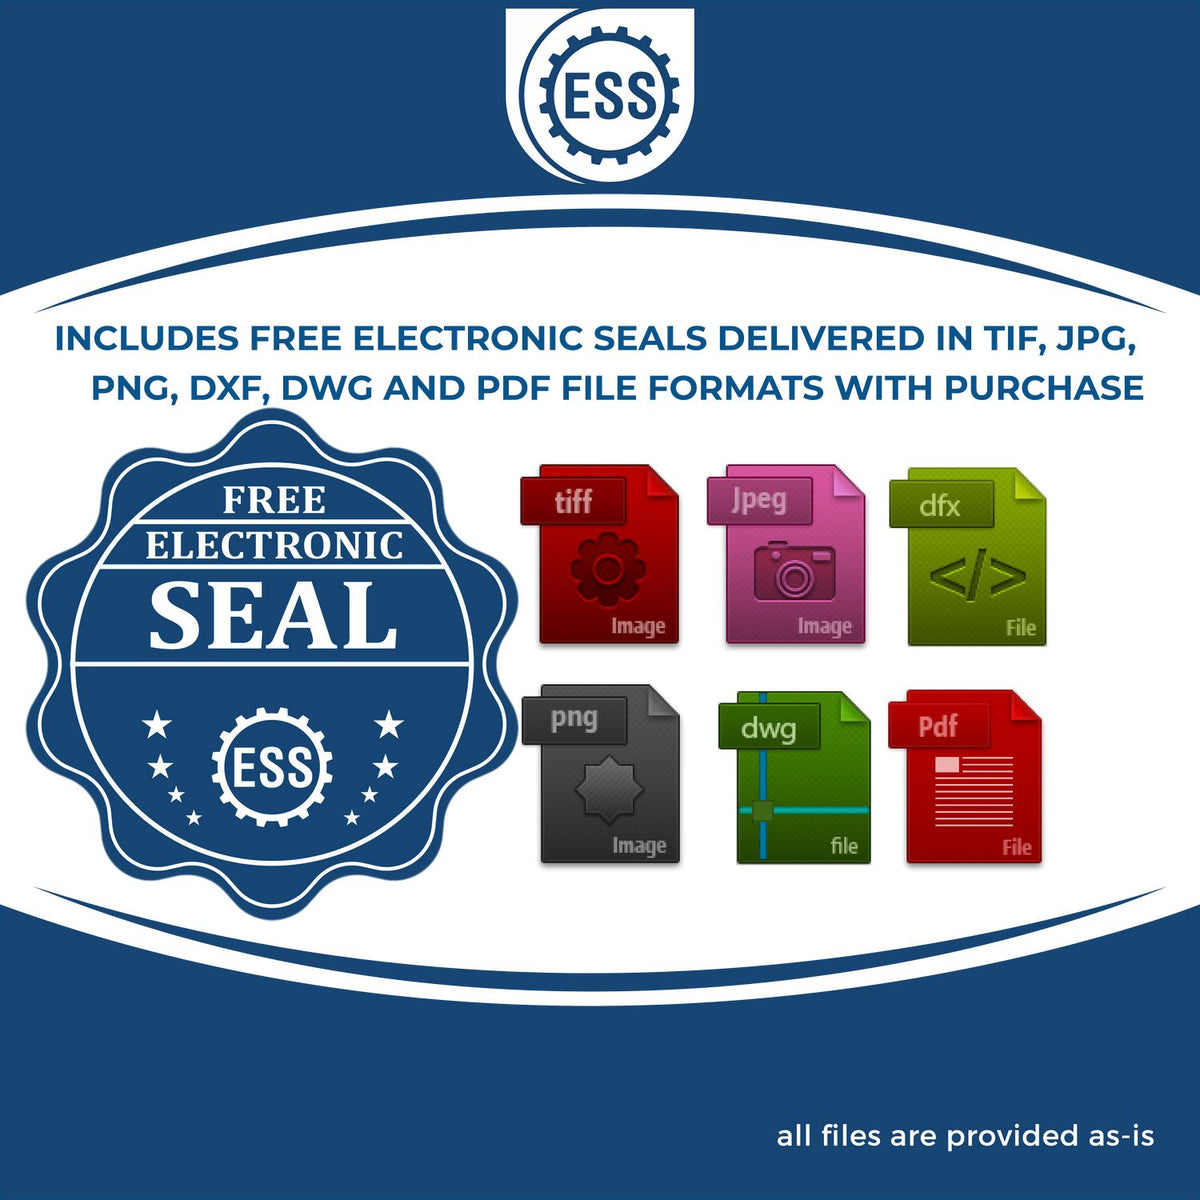 An infographic for the free electronic seal for the Hybrid Illinois Engineer Seal illustrating the different file type icons such as DXF, DWG, TIF, JPG and PNG.